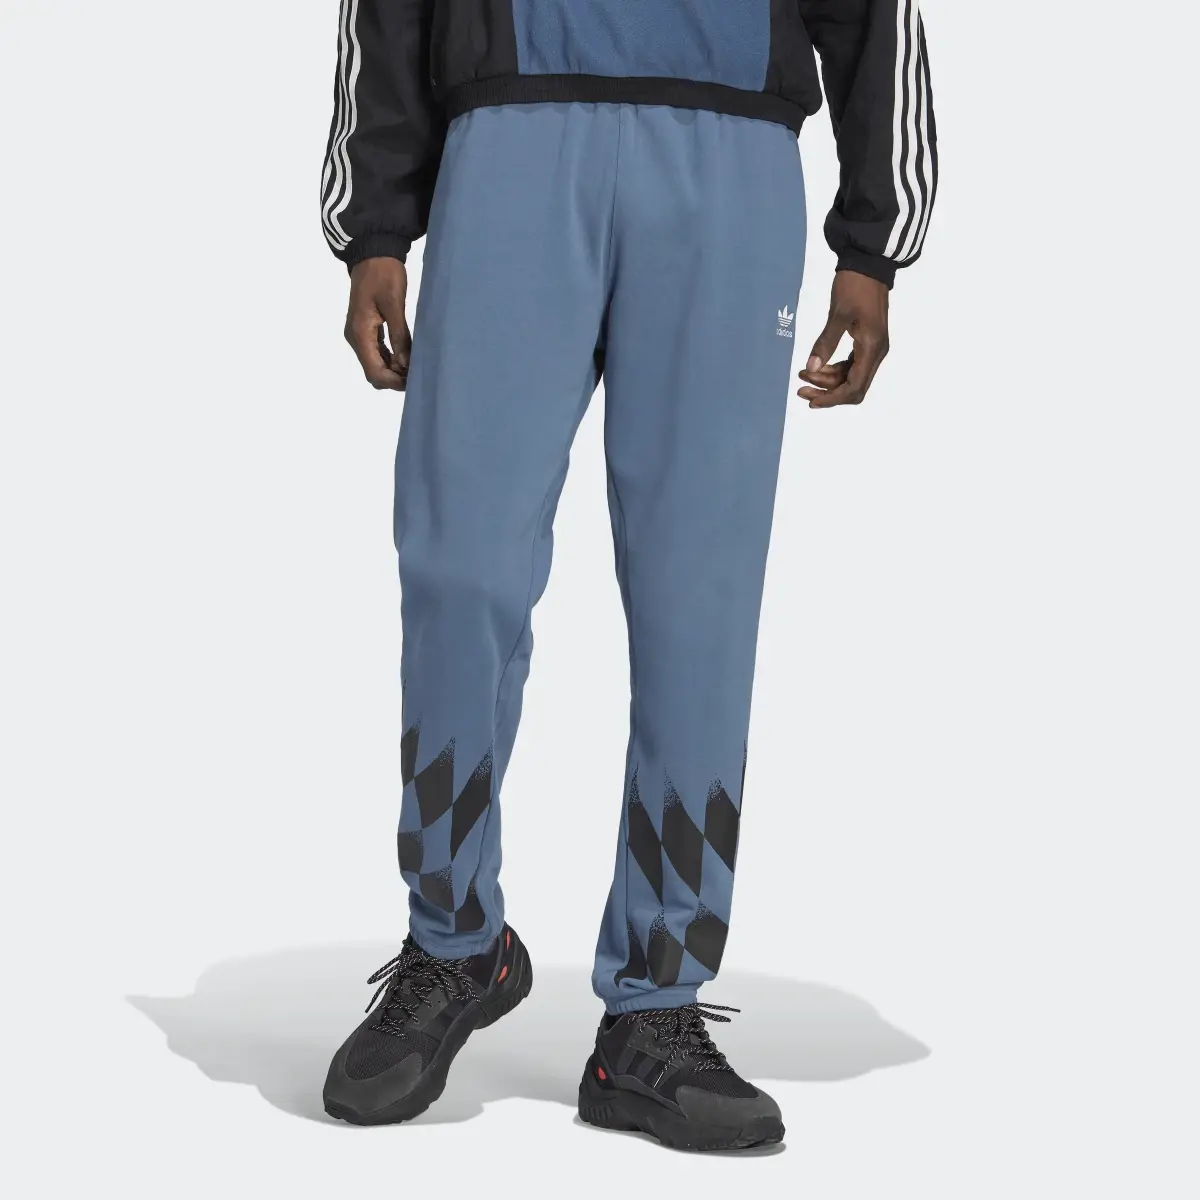 Adidas Rekive Placed Graphic Sweat Pants. 1